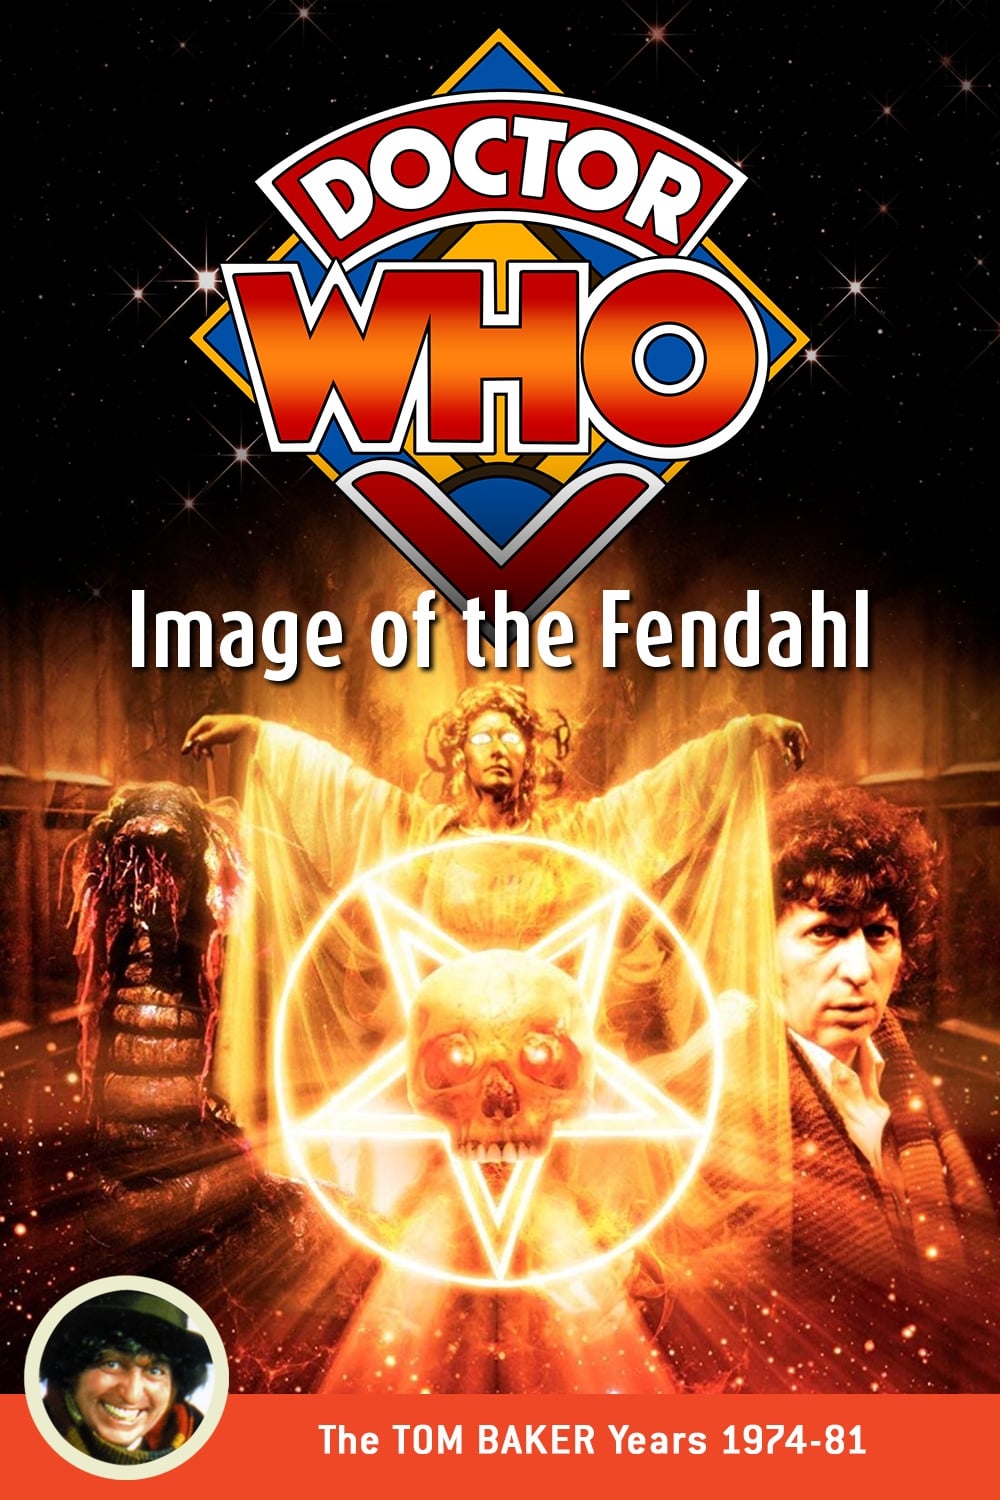 Doctor Who: Image of the Fendahl (1977)